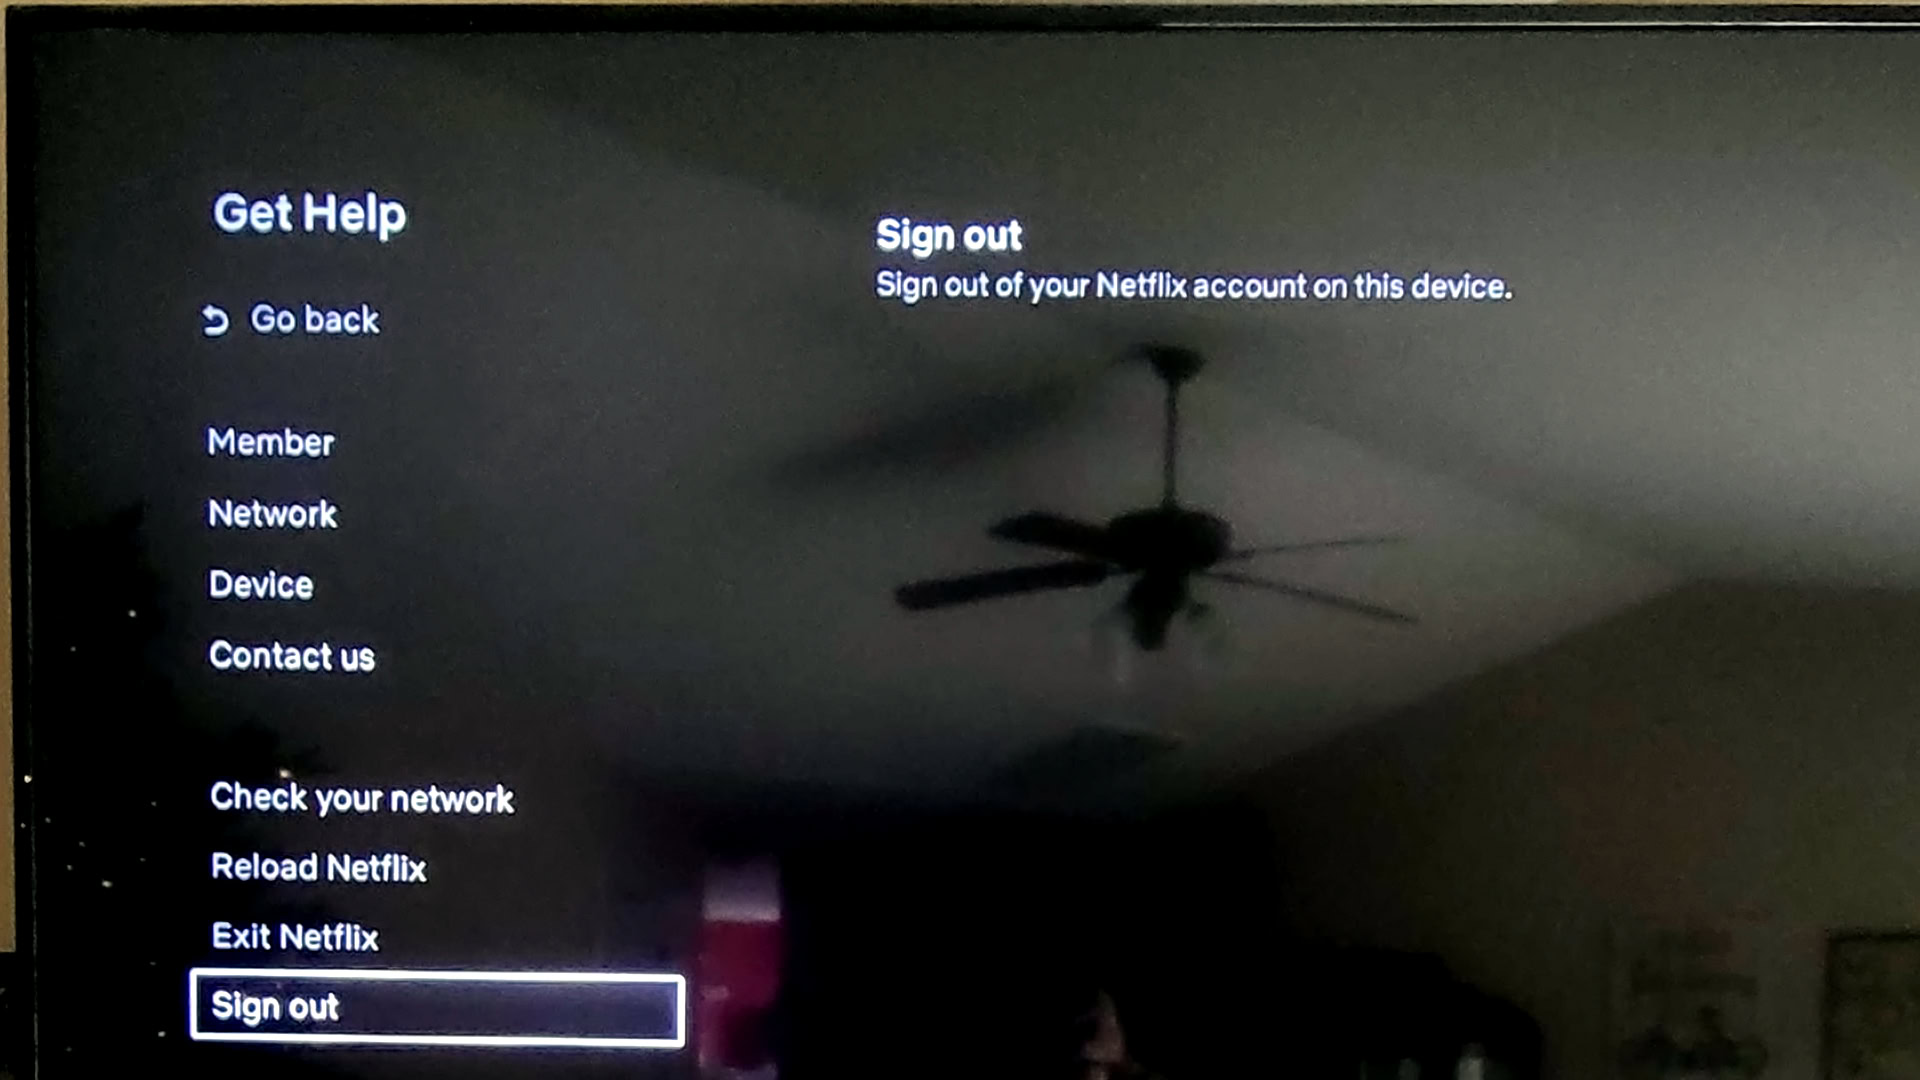 Signing out of Netflix on Roku